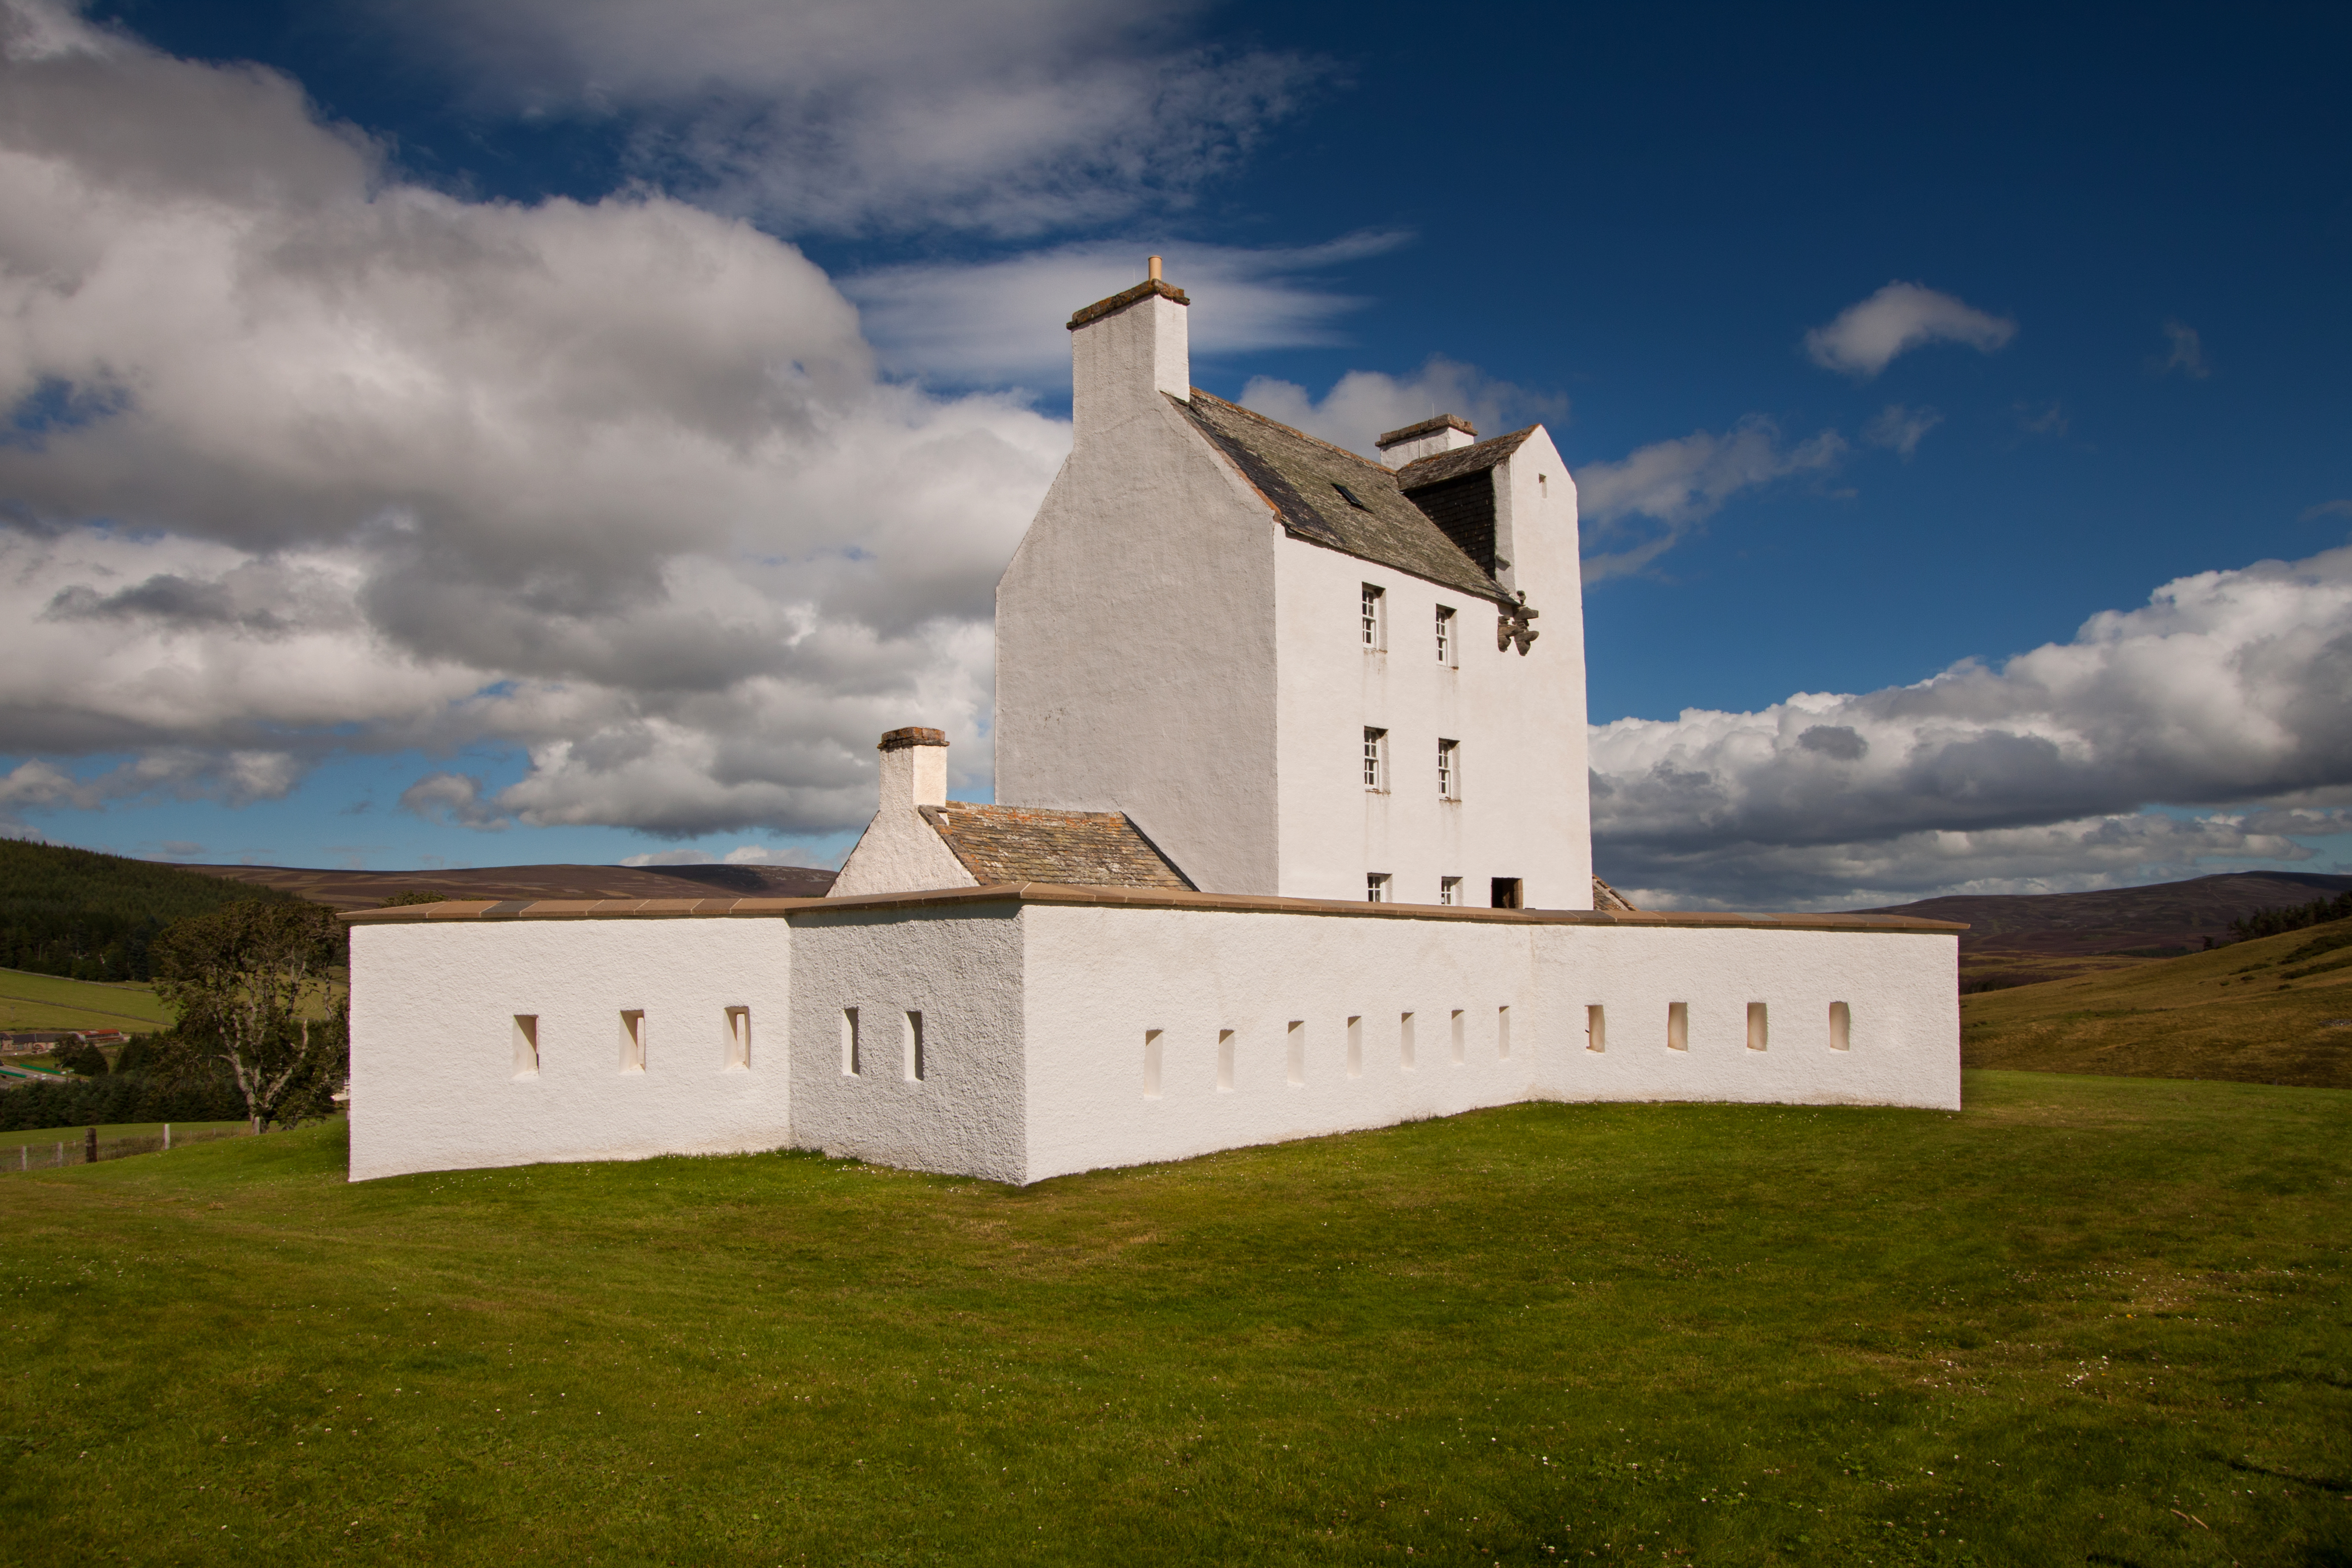 Corgarff Castle is tower house fortress with a unique star shaped defence wall built in 1550